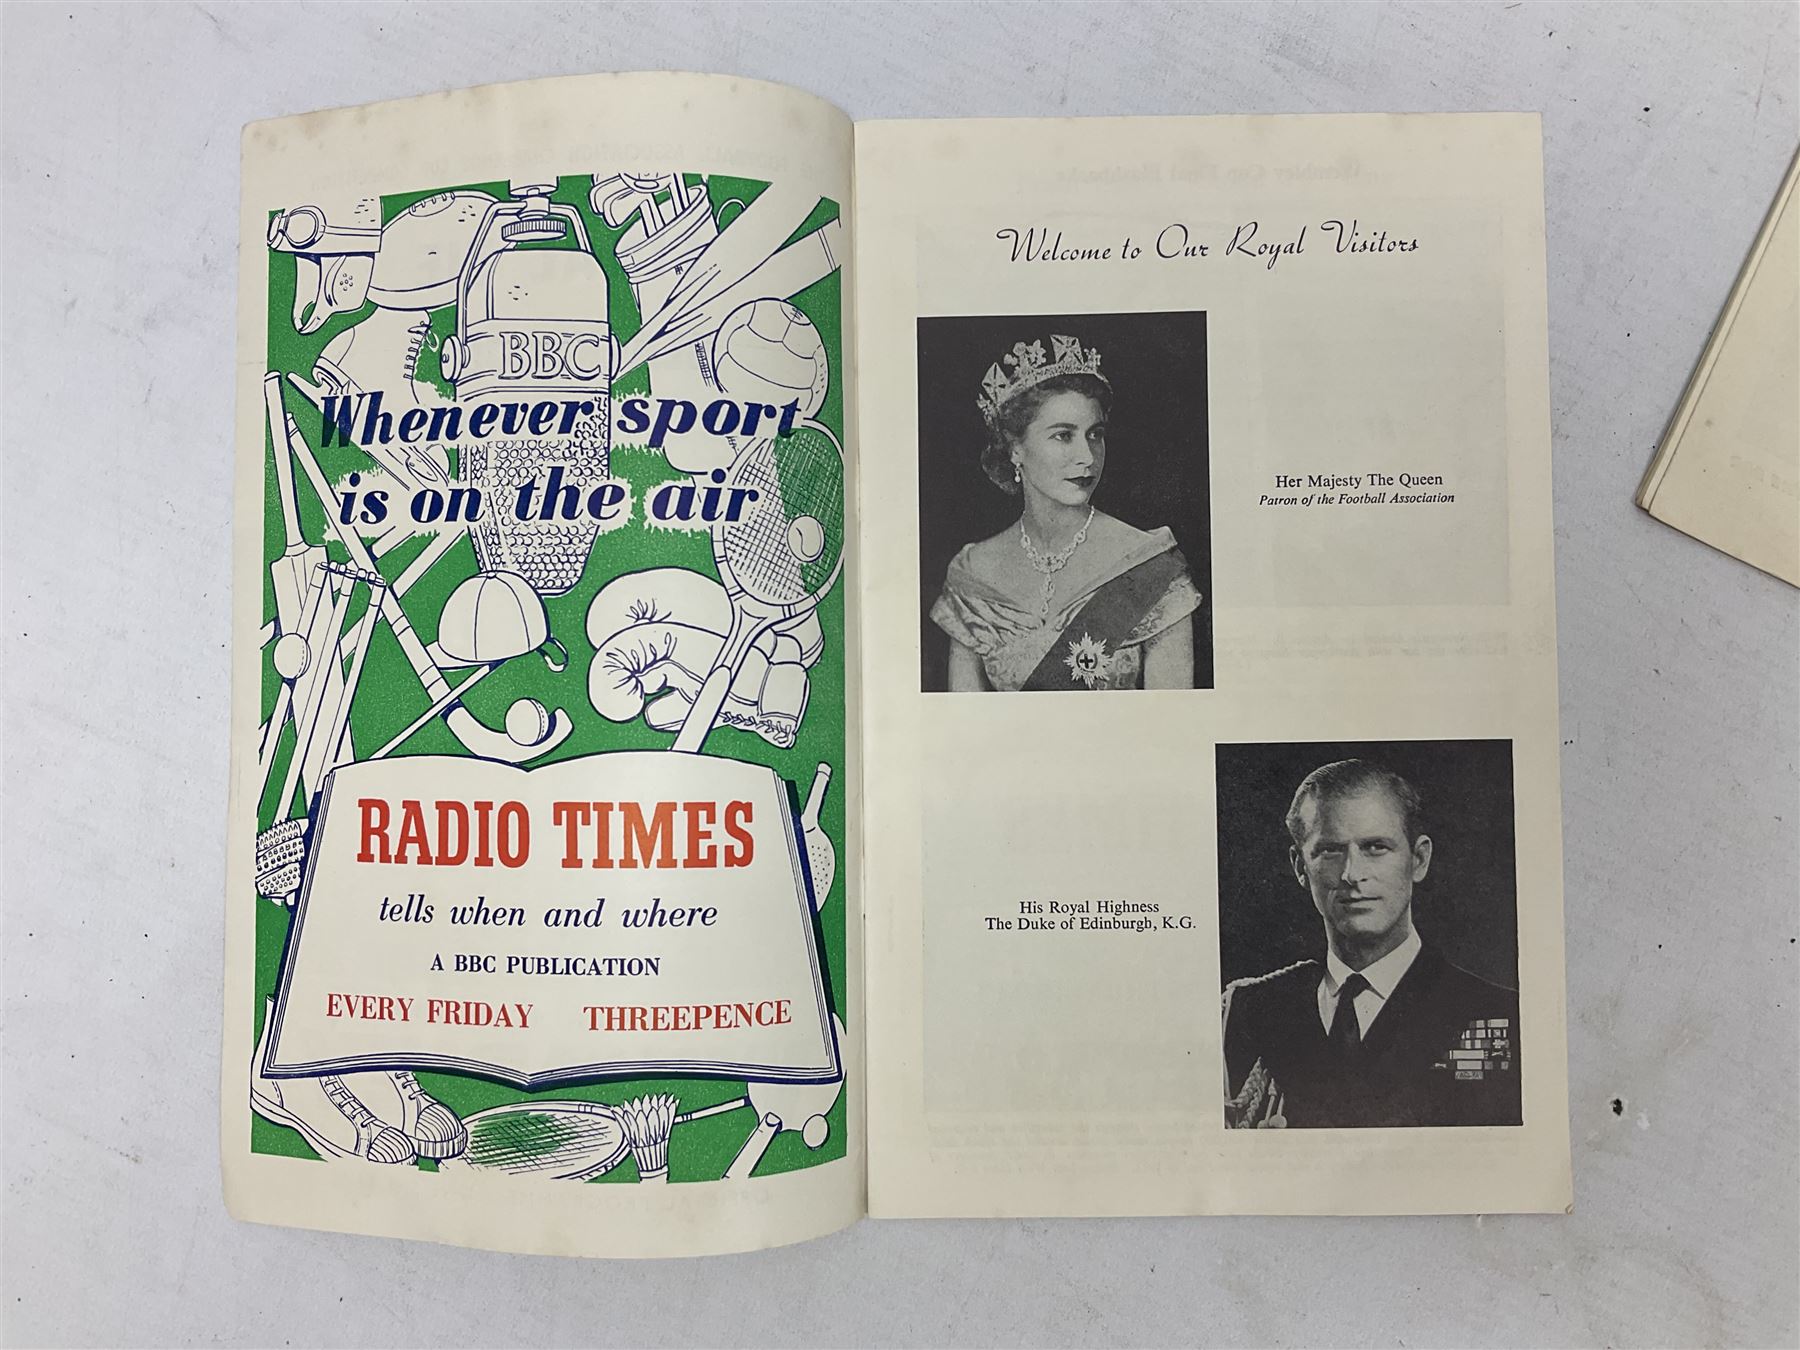 Three F.A. Cup Final programmes at Wembley - 1952 Arsenal v Newcastle United played on May 3rd; 1953 - Image 3 of 11